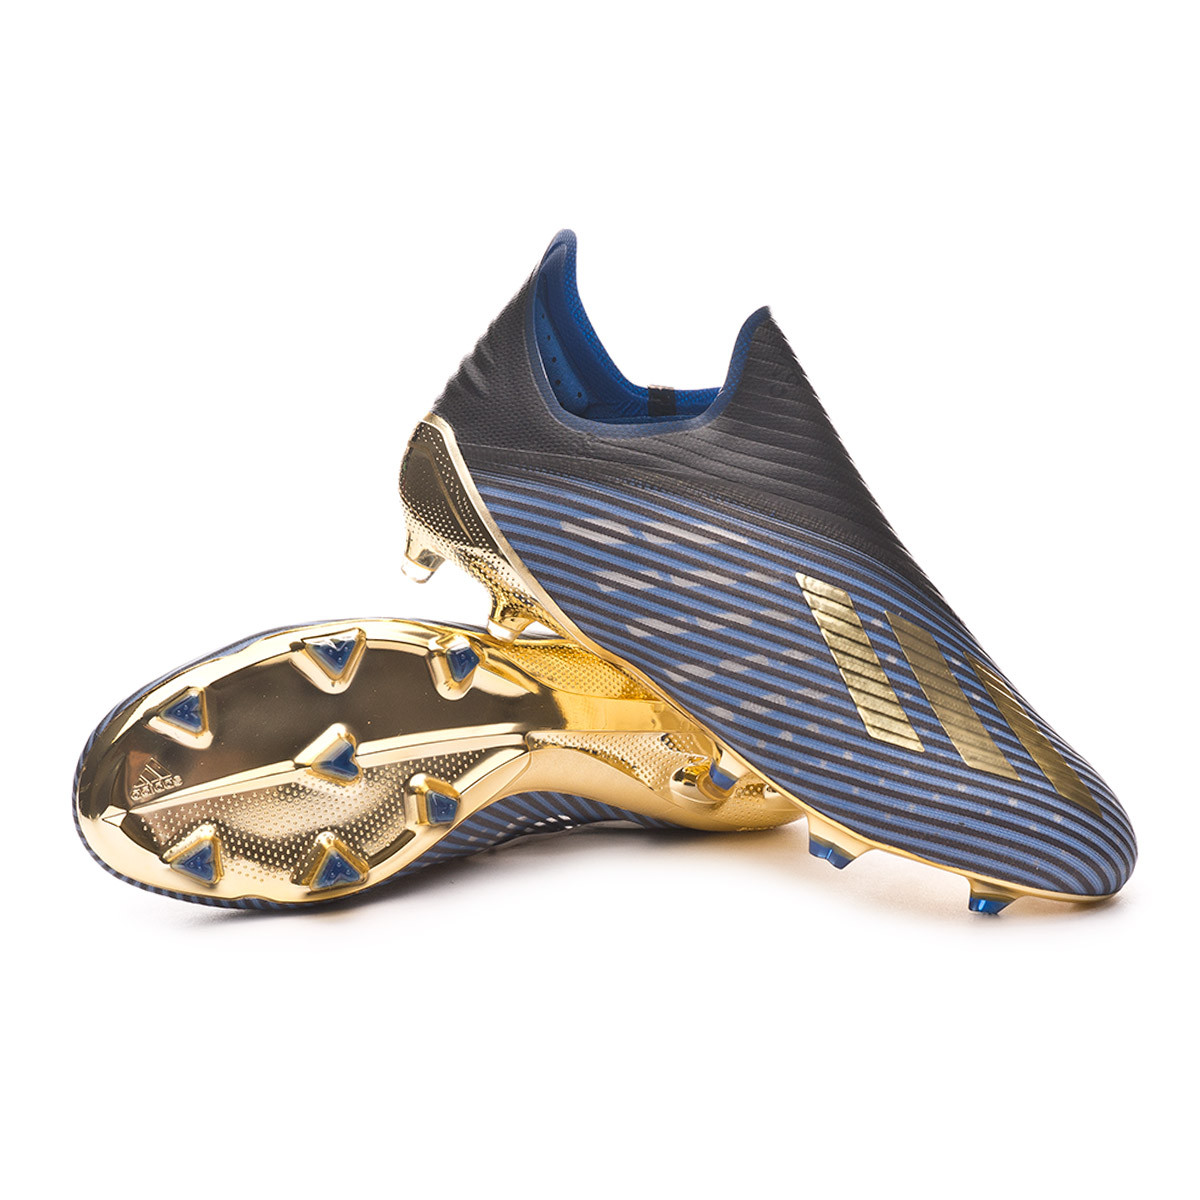 black and gold football shoes